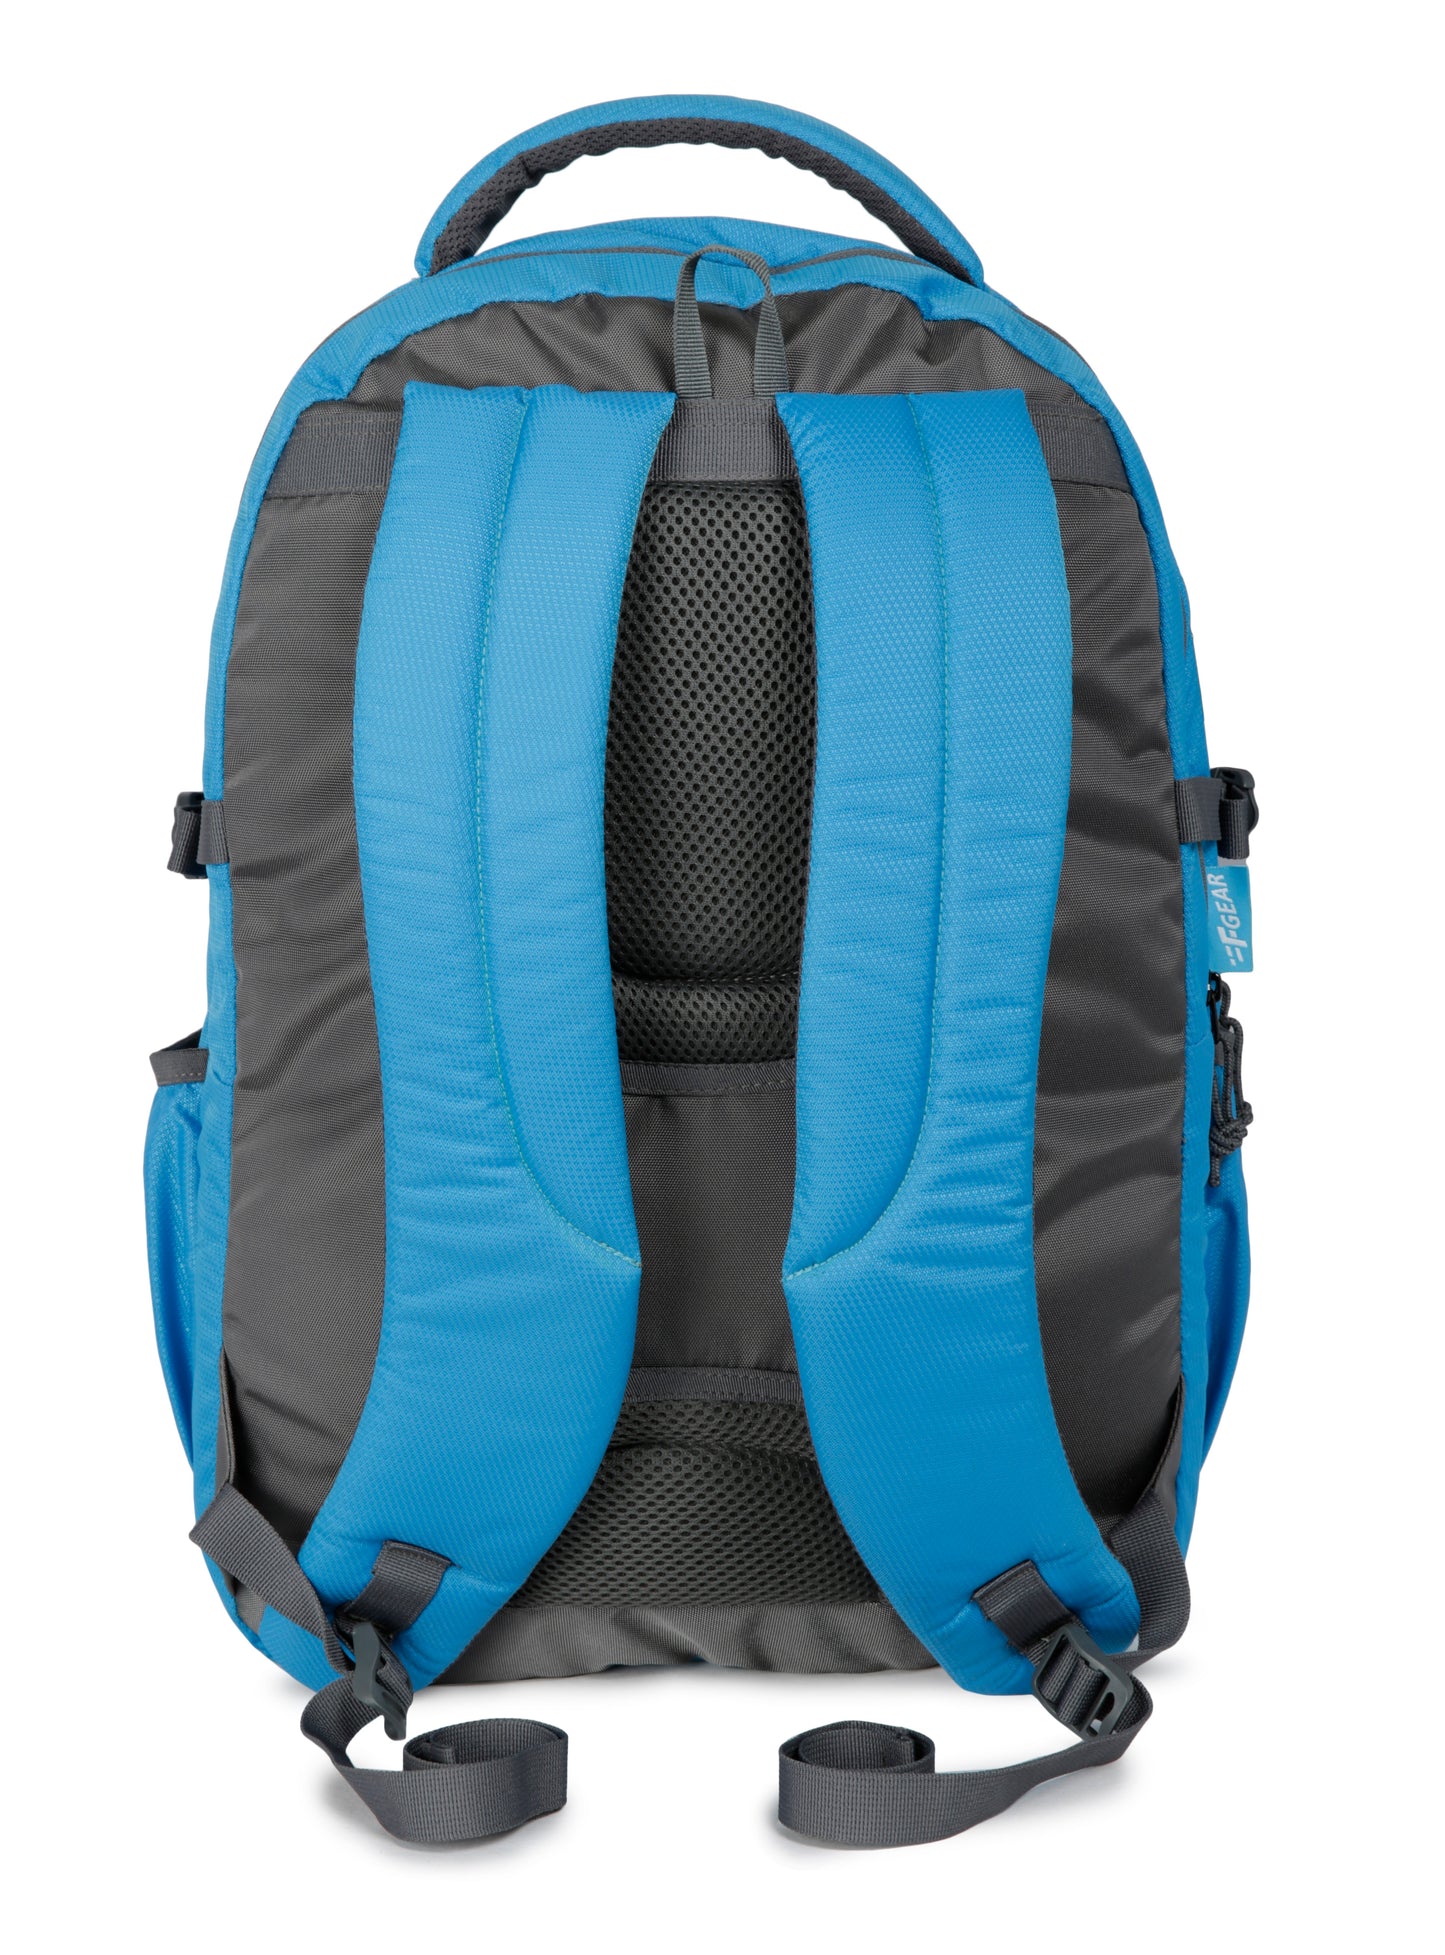 Talent Doby 32L Blue Laptop Backpack With Rain Cover